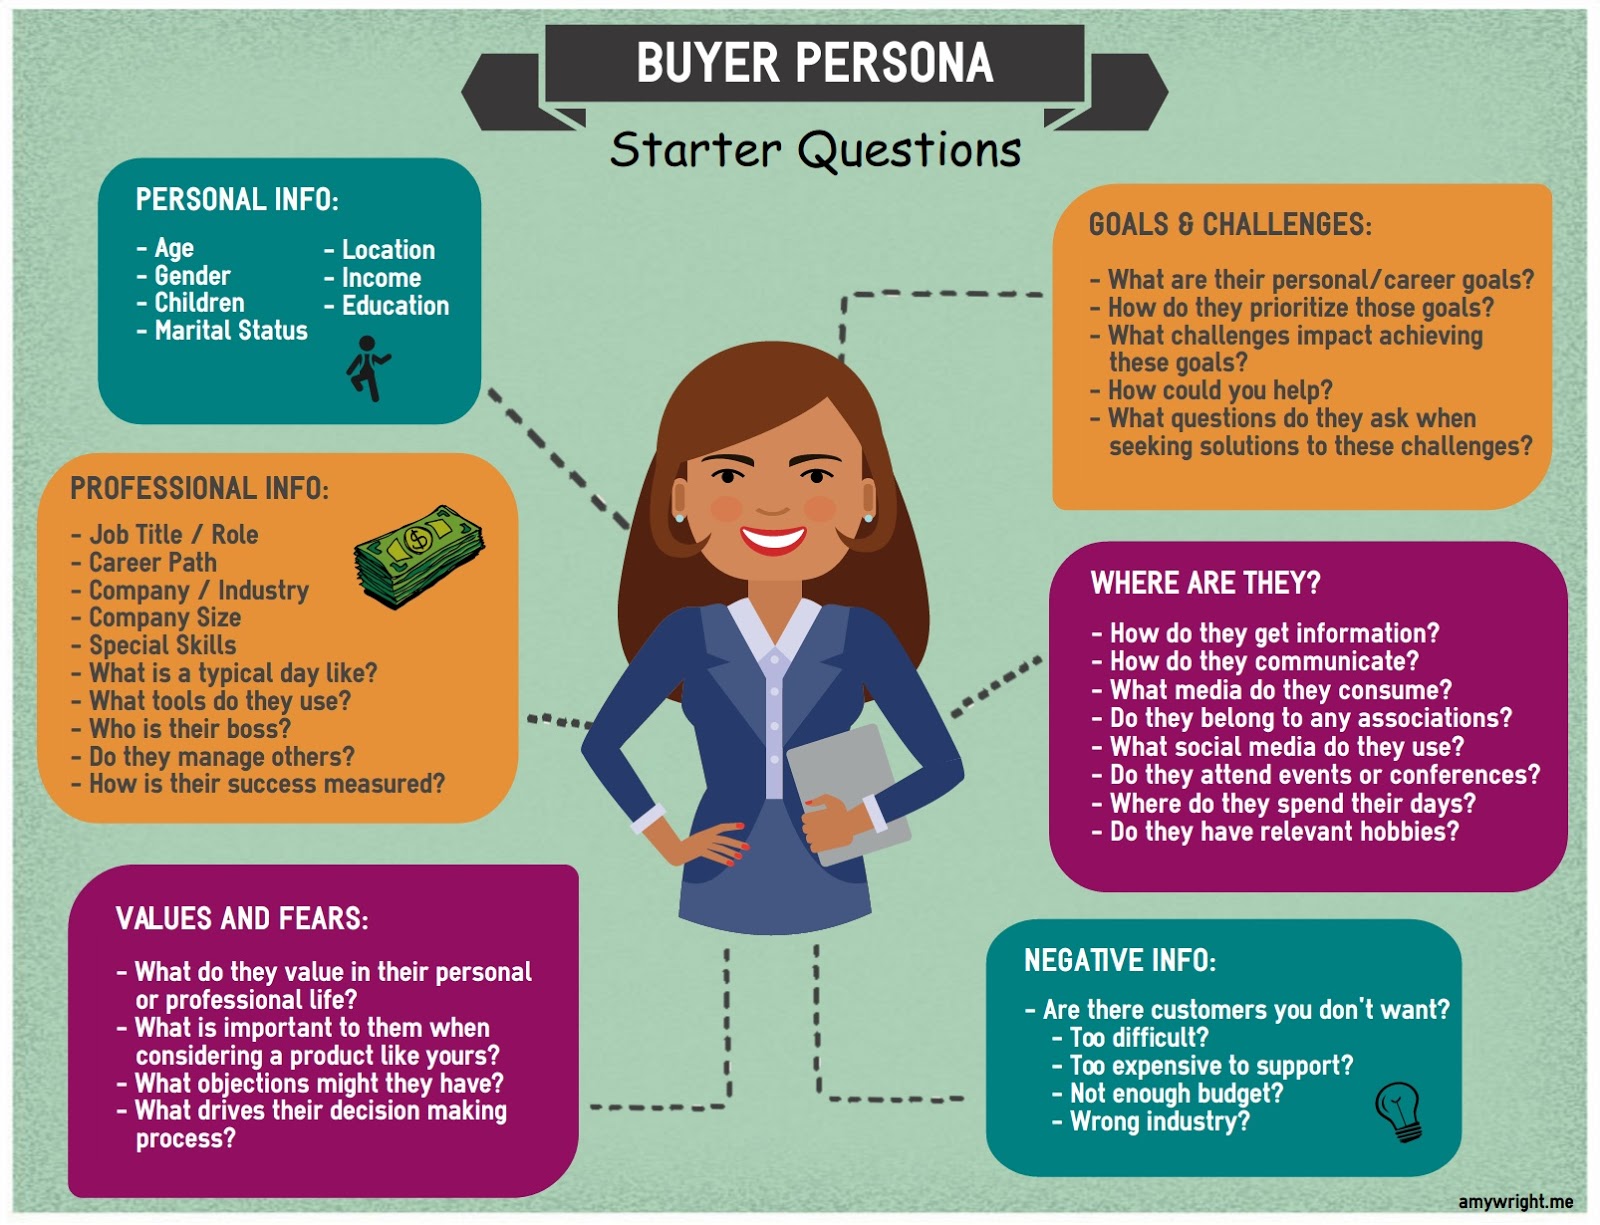 Buyer persona infographic with a brown-haired woman in the center.